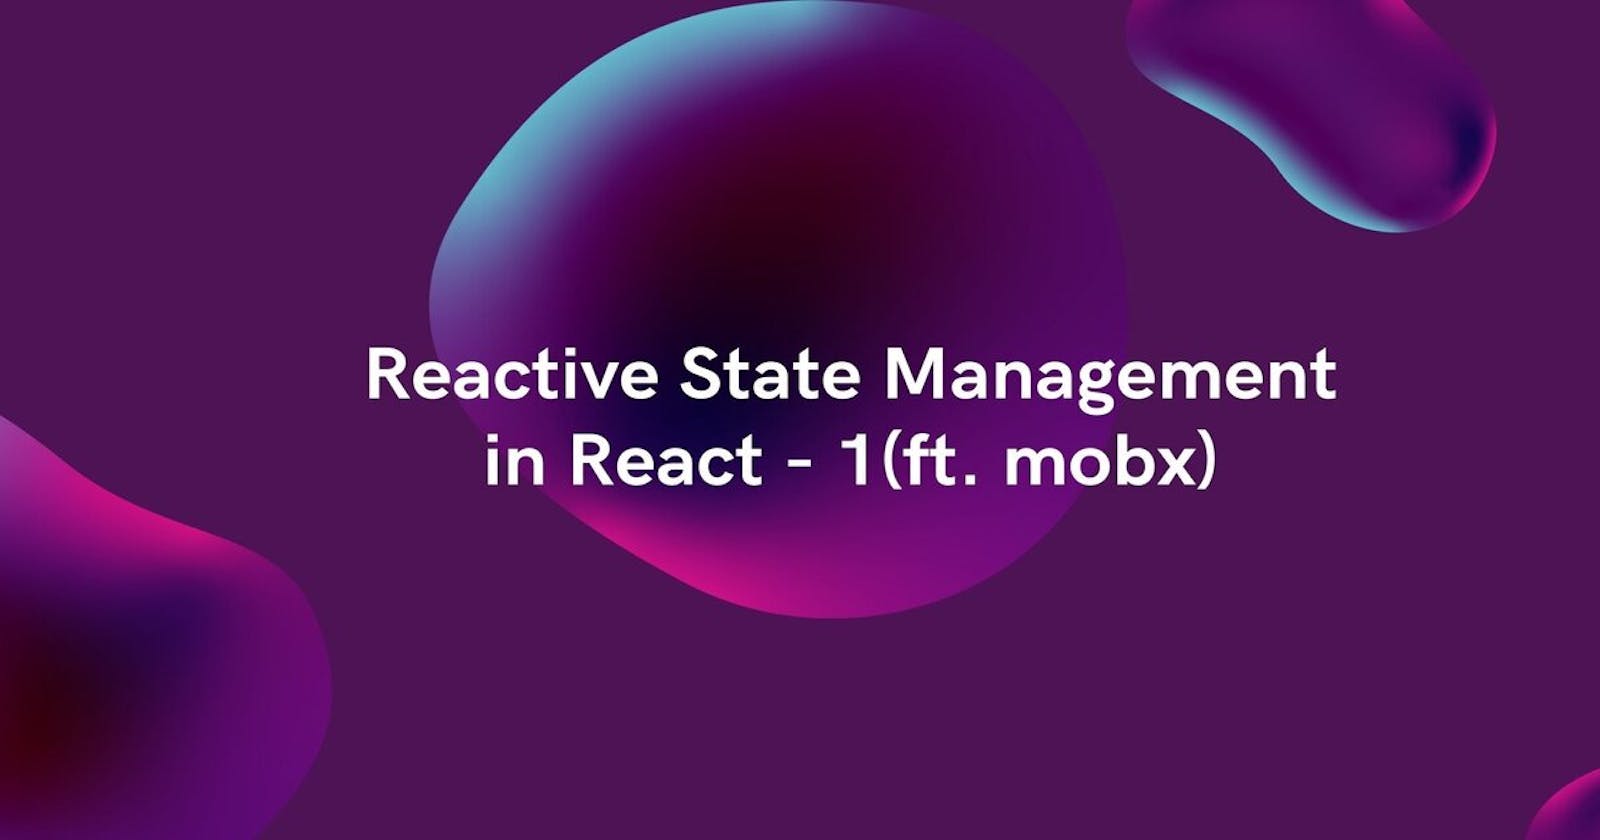 Reactive State 1 - An Alternative Way To Manage State in React Apps (ft. mobx)